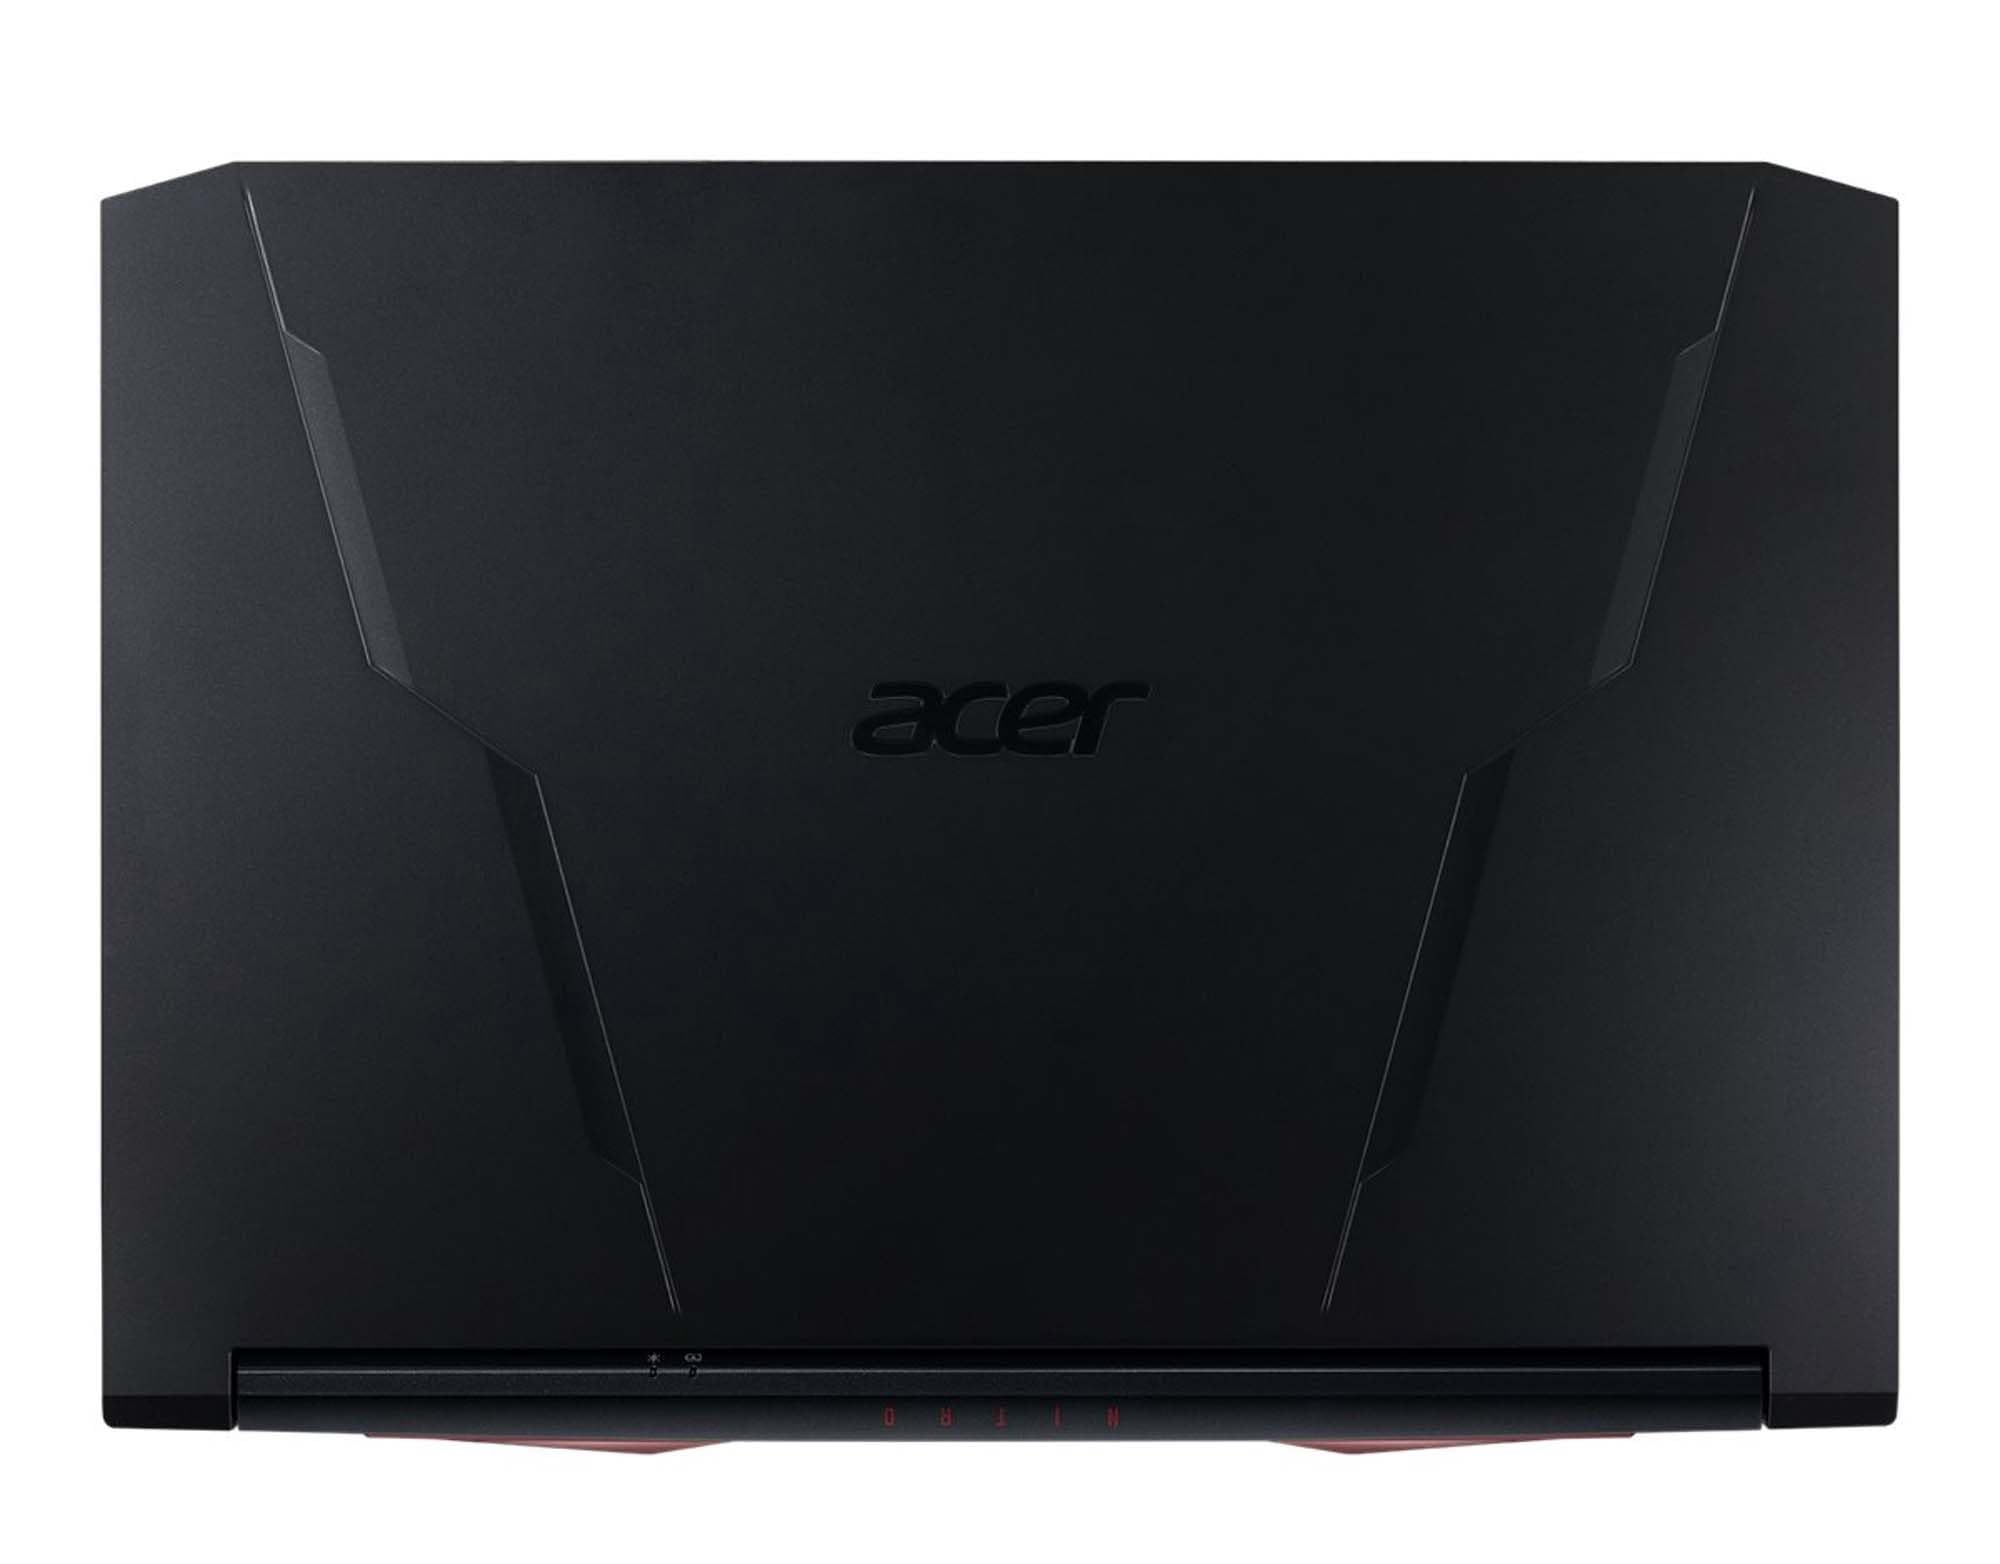 acer Nitro AN515 Gaming Laptop Six Core Intel i5-11400H up to 4.5Ghz 16GB 512GB SSD 15.6in Full HD HDMI Multi-Color RGB Backlit Keyboard NVIDIA GeForce RTX 3050 Win 11 (AN515-57- Renewed)